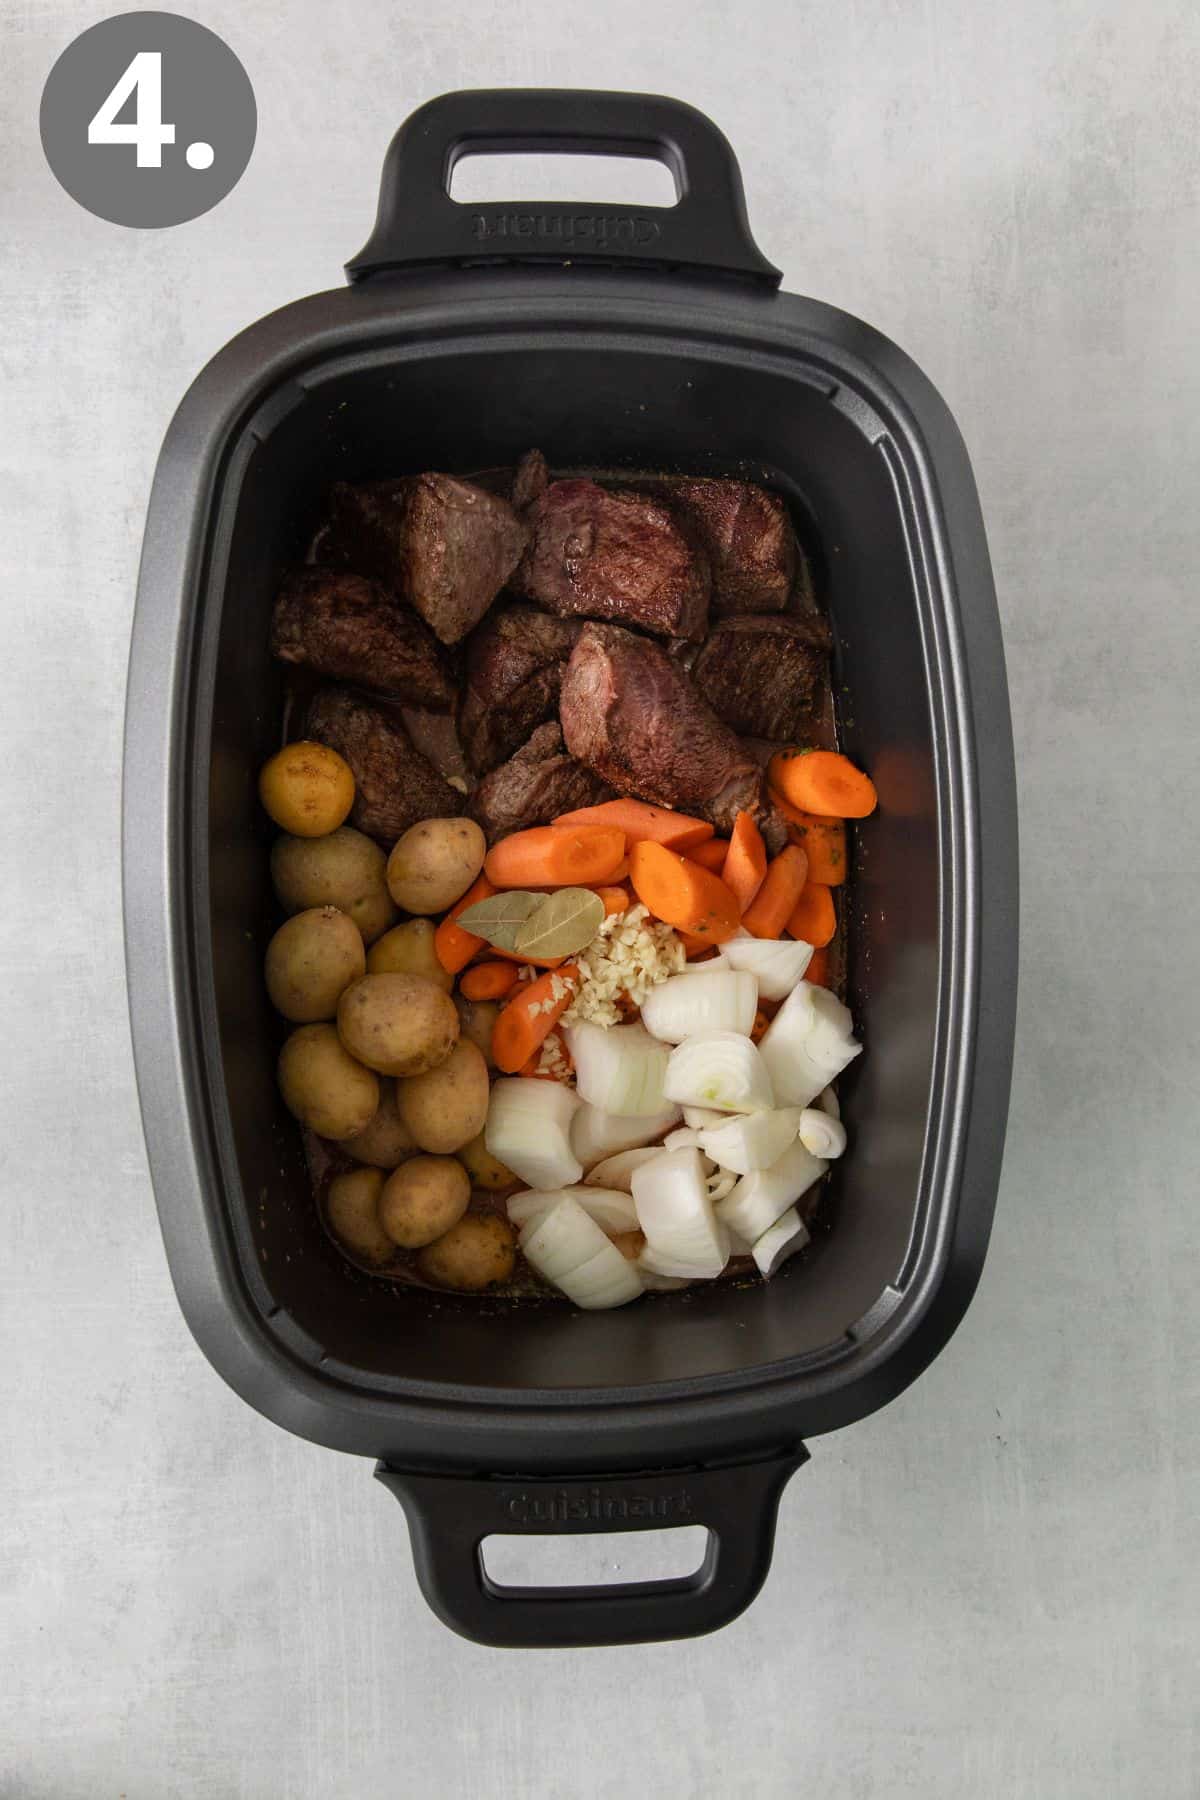 Sirloin tip roast, carrots, potatoes, and onions in a slow cooker